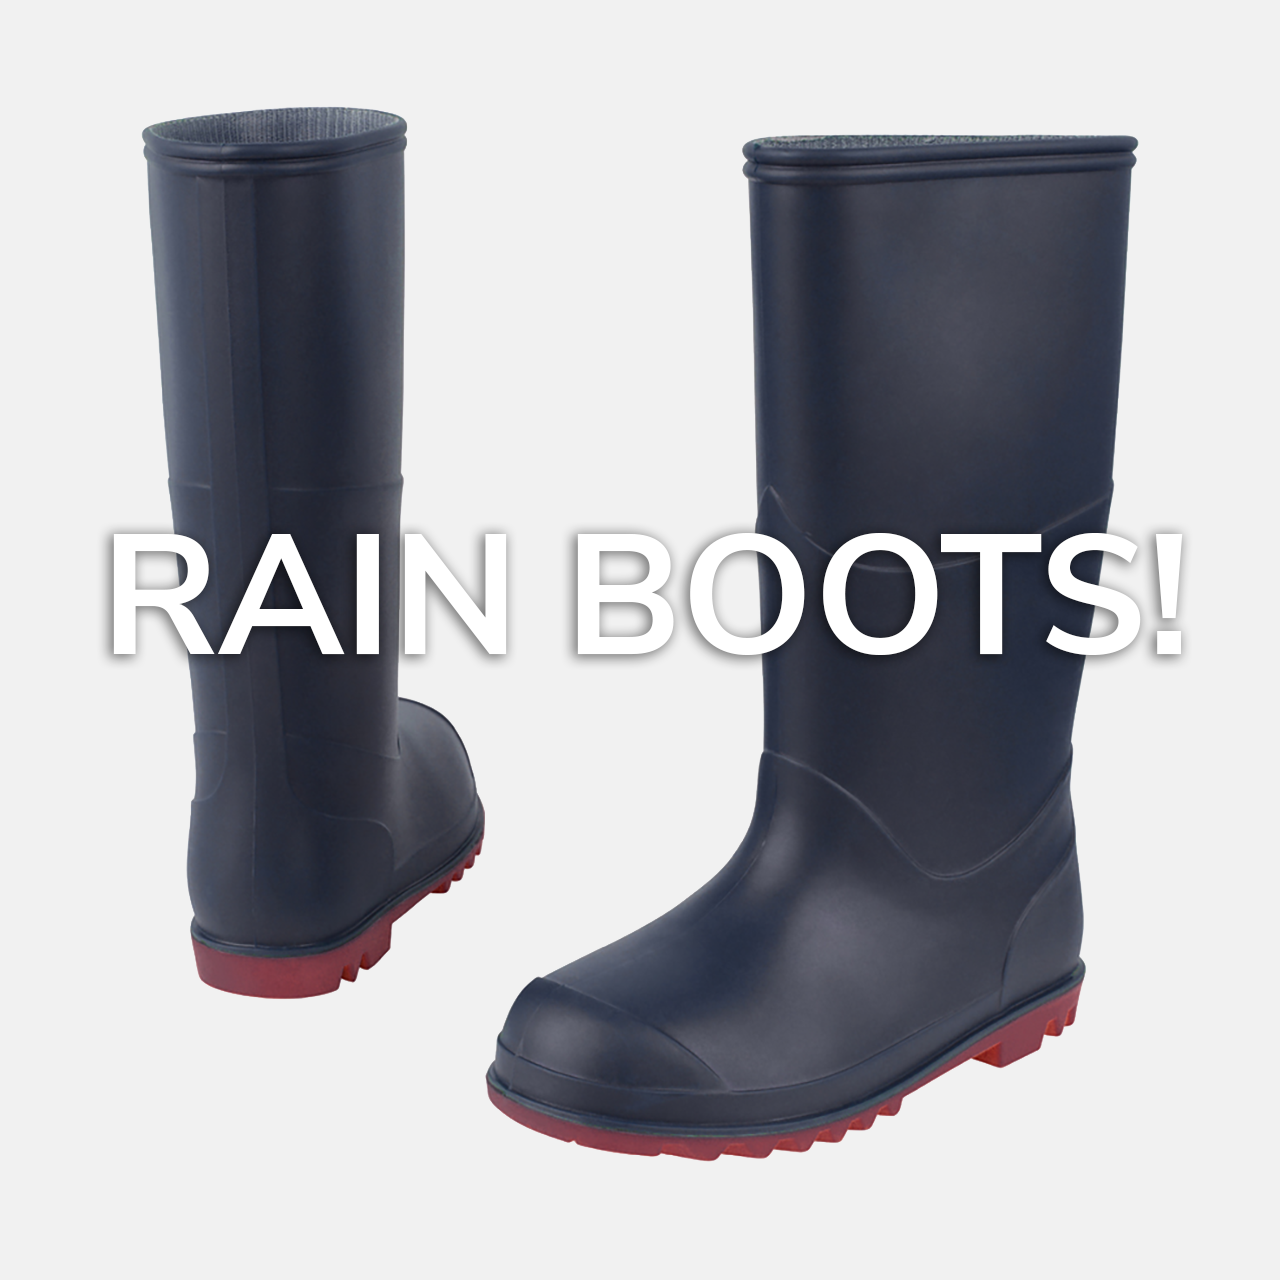 Wide selection of waterproof rain and wellie boots for kids at forest and nature school.